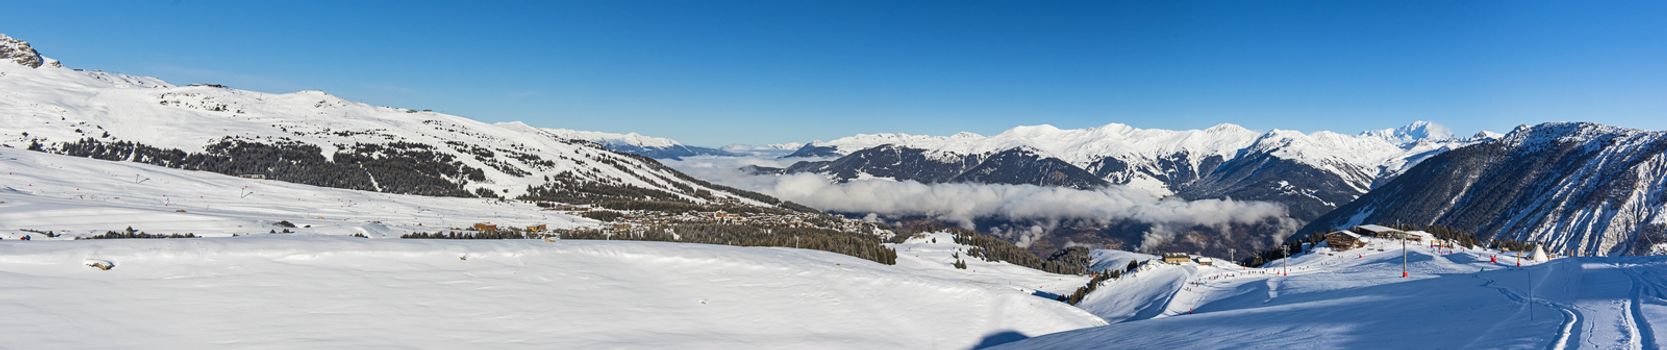 Panoramic view down snow covered valley in alpine mountain range with conifer pine trees and clouds